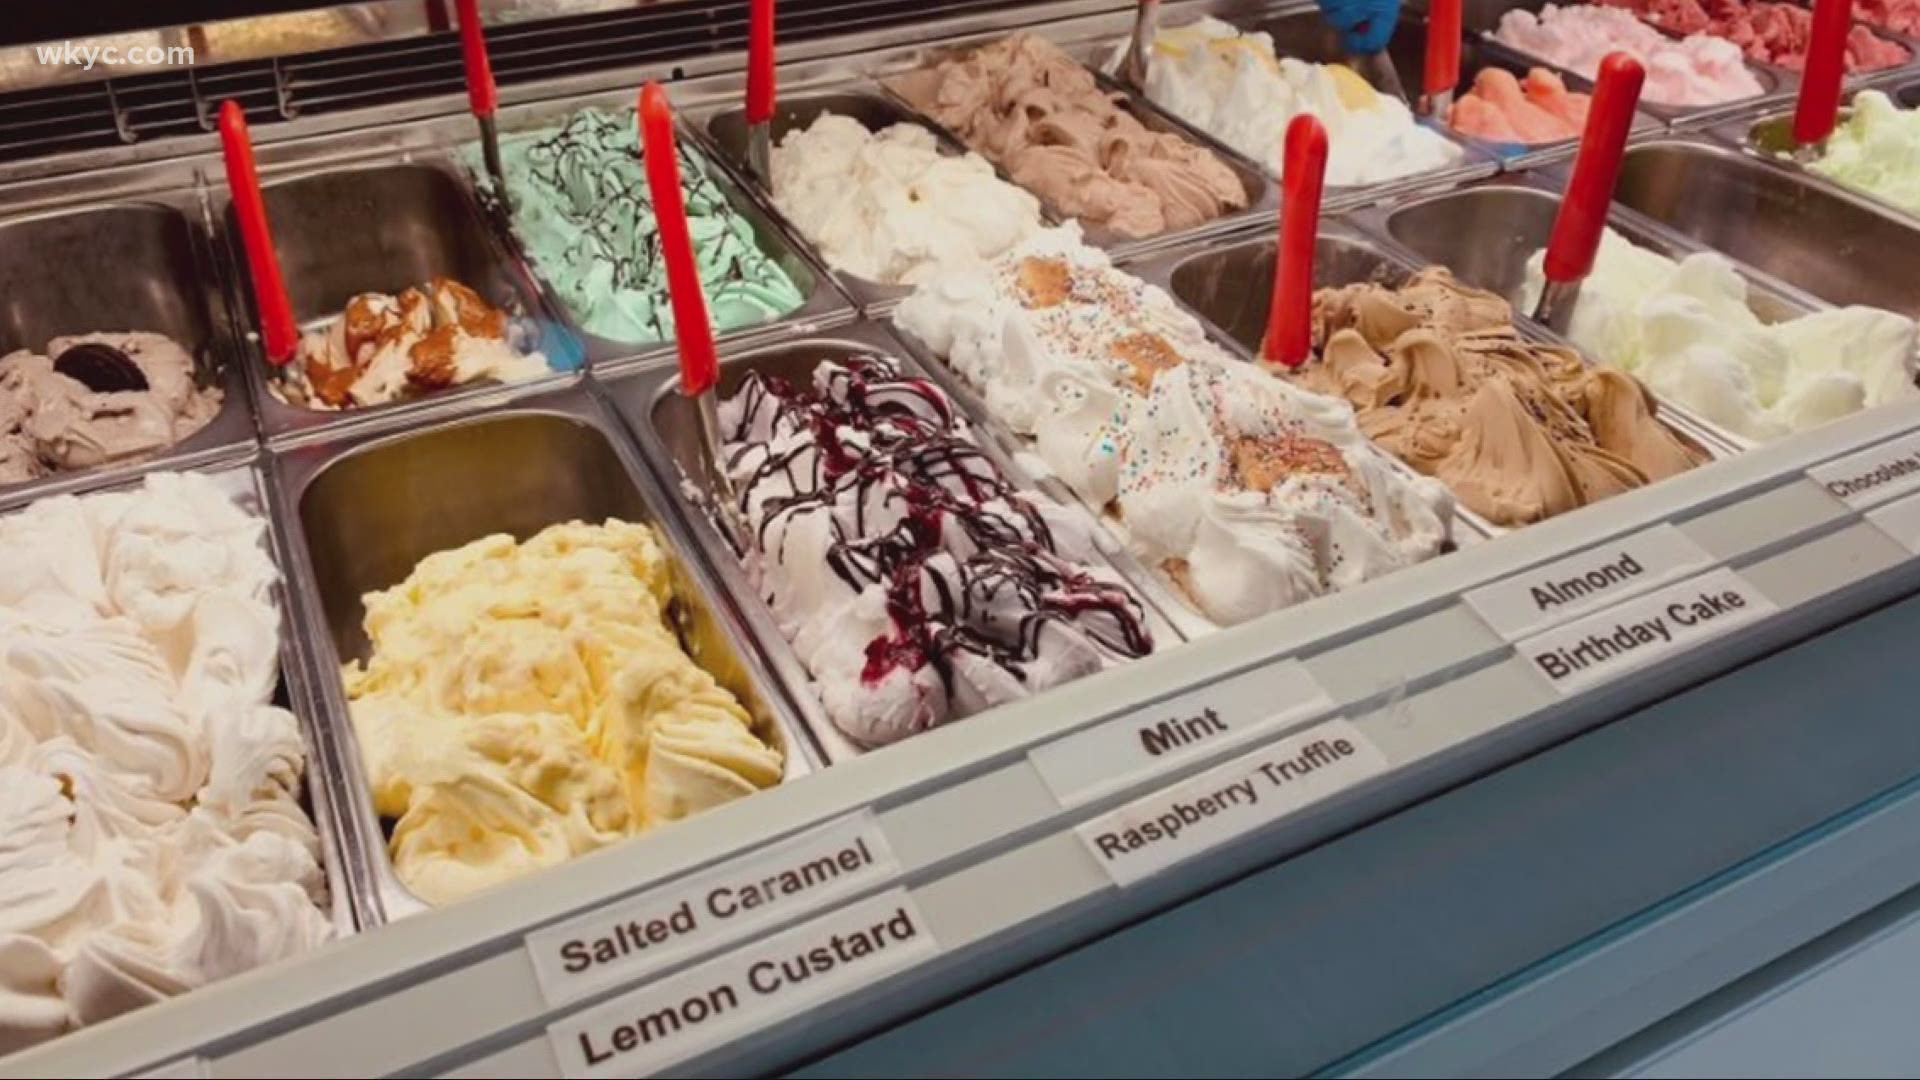 Cleveland Ice Cream Guide: Check out these 15 spots | wkyc.com